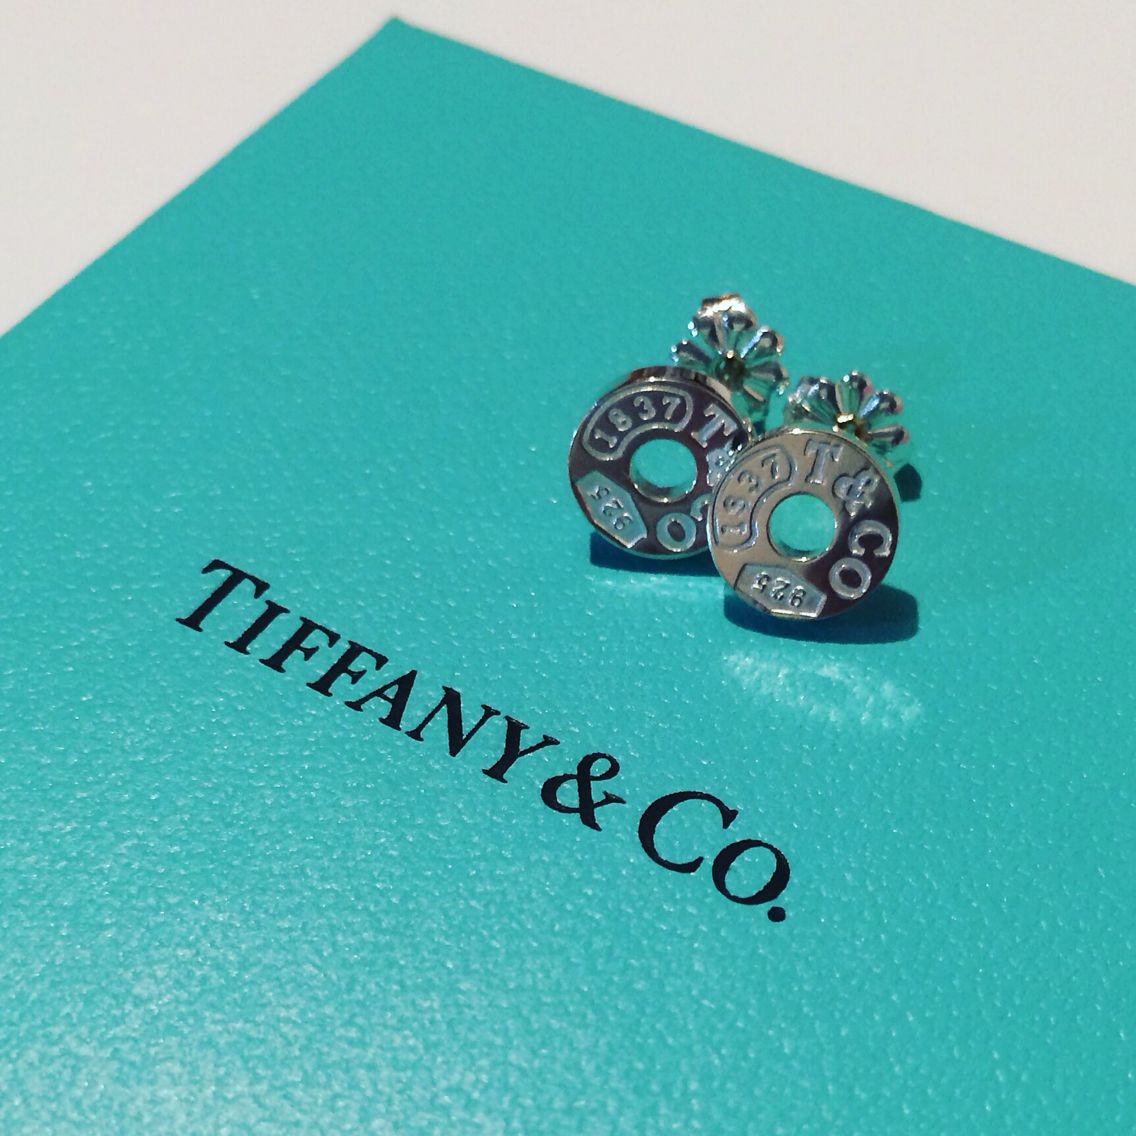 Tiffany's 1837 circle stud earrings for my 21st.